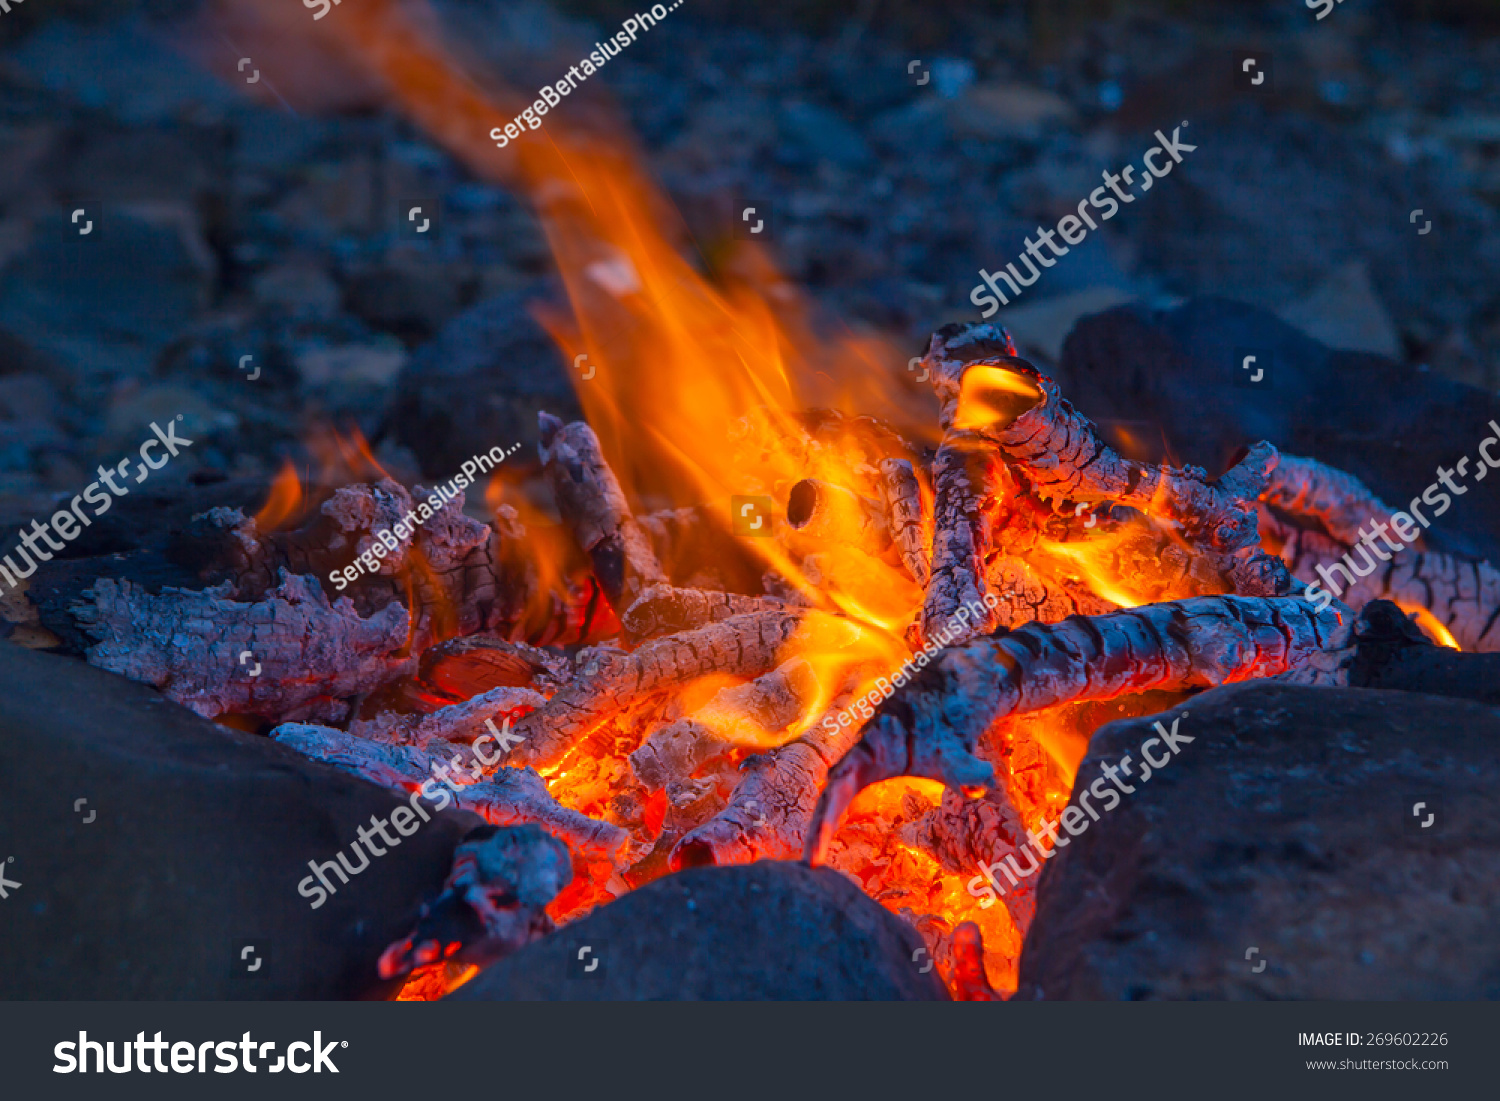 Classic camping campfire in rock fire ring at dusk closeup #269602226